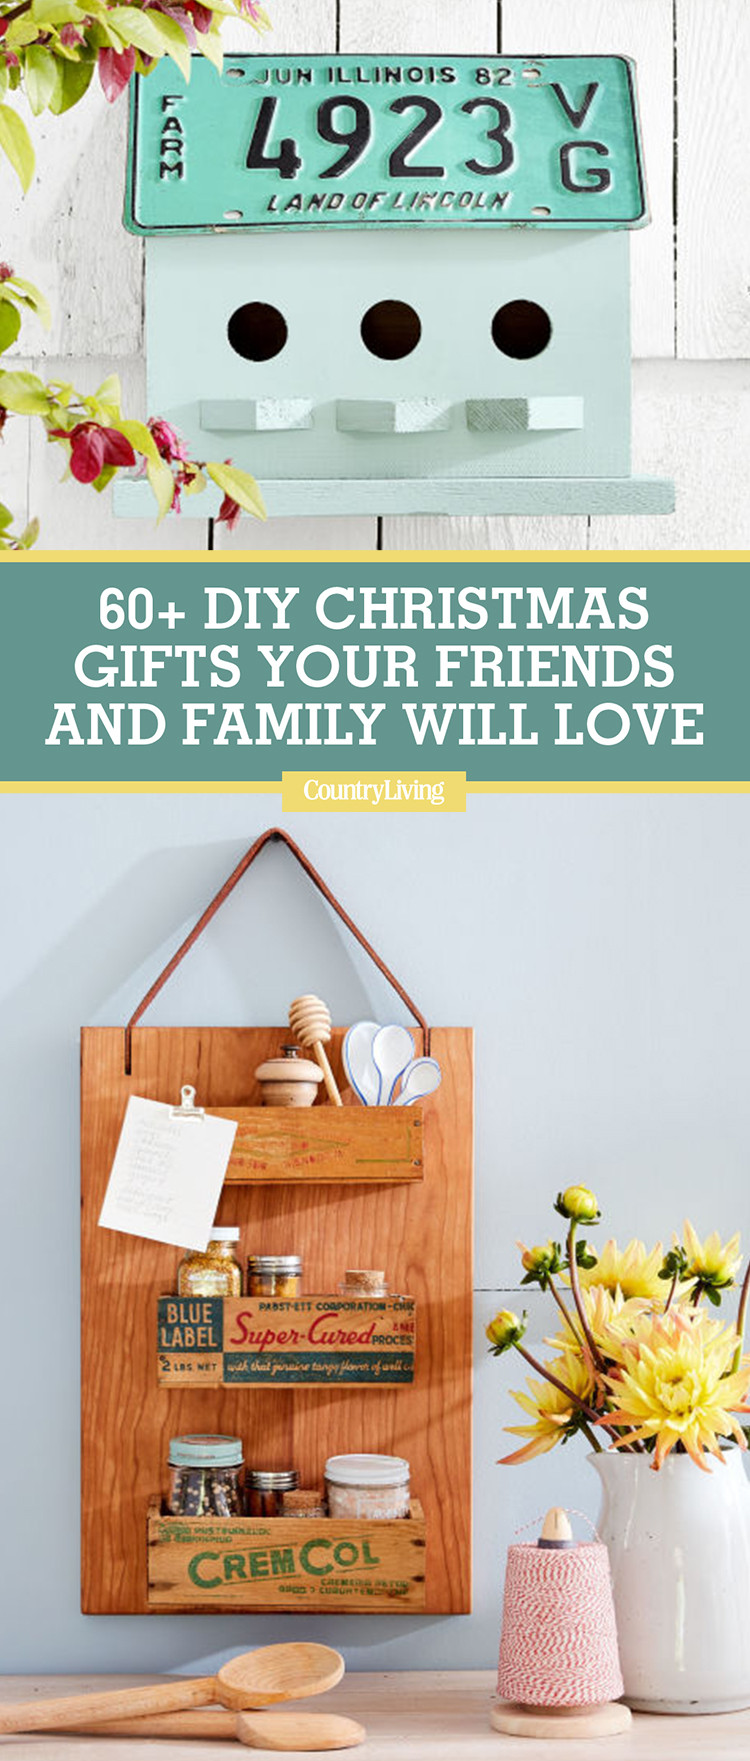 DIY Projects For Christmas Gifts
 60 DIY Homemade Christmas Gifts Craft Ideas for